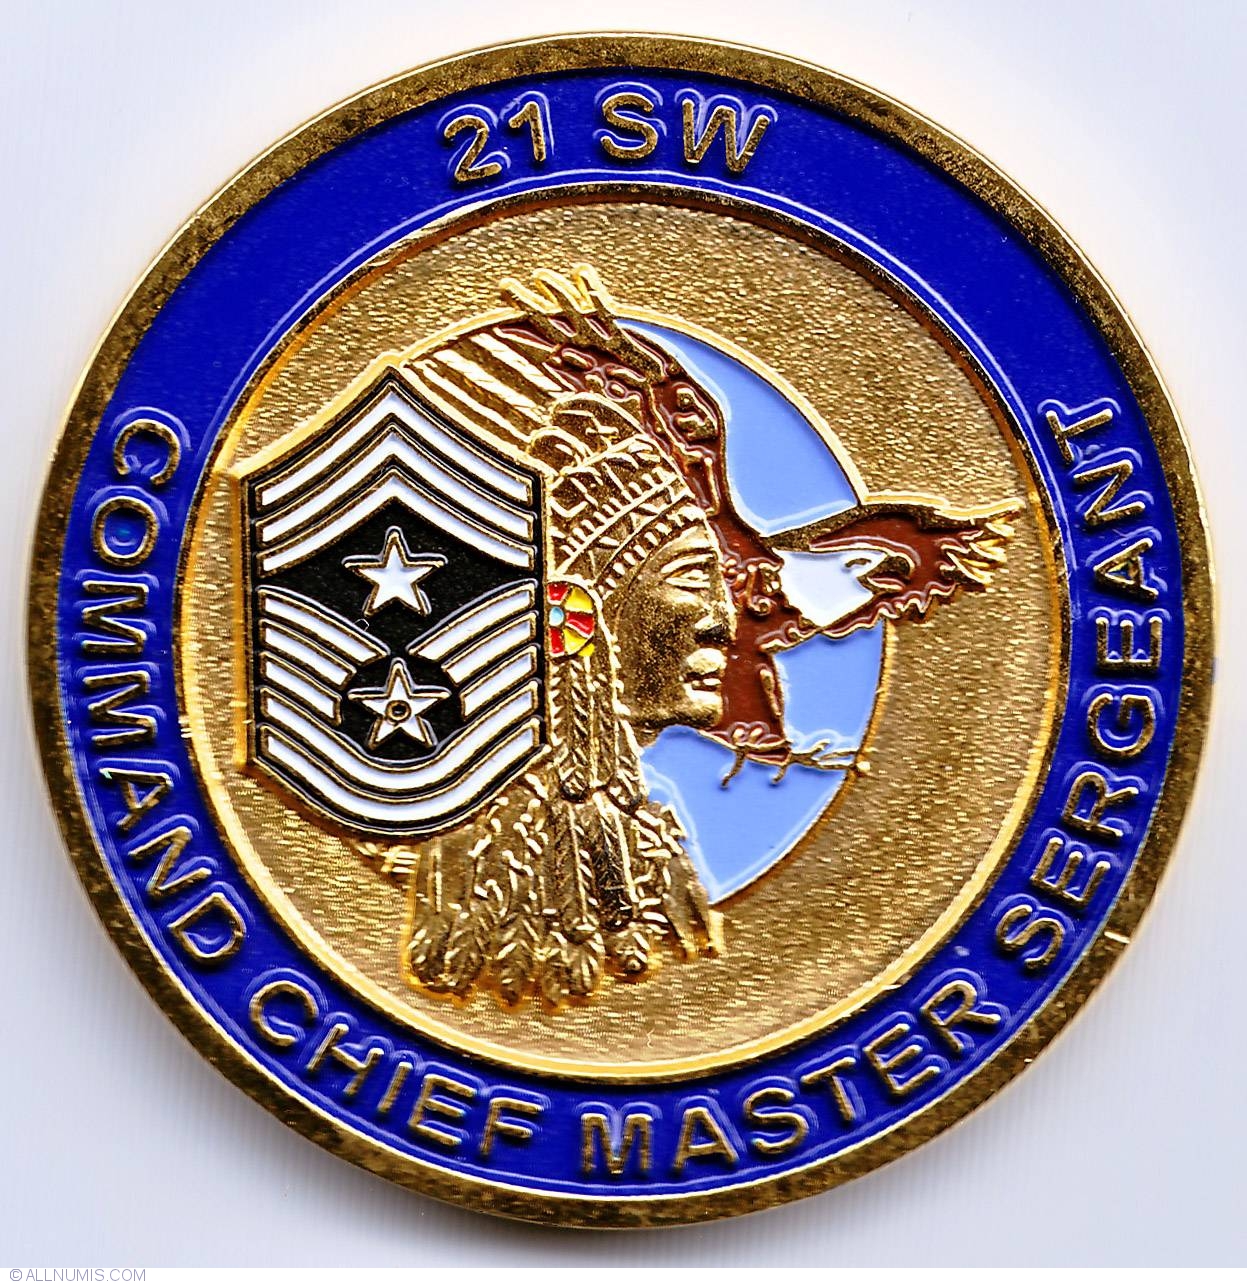 21 Space Wing Command Chief Master Sergeant, Military Challenge coin -Air Force ...